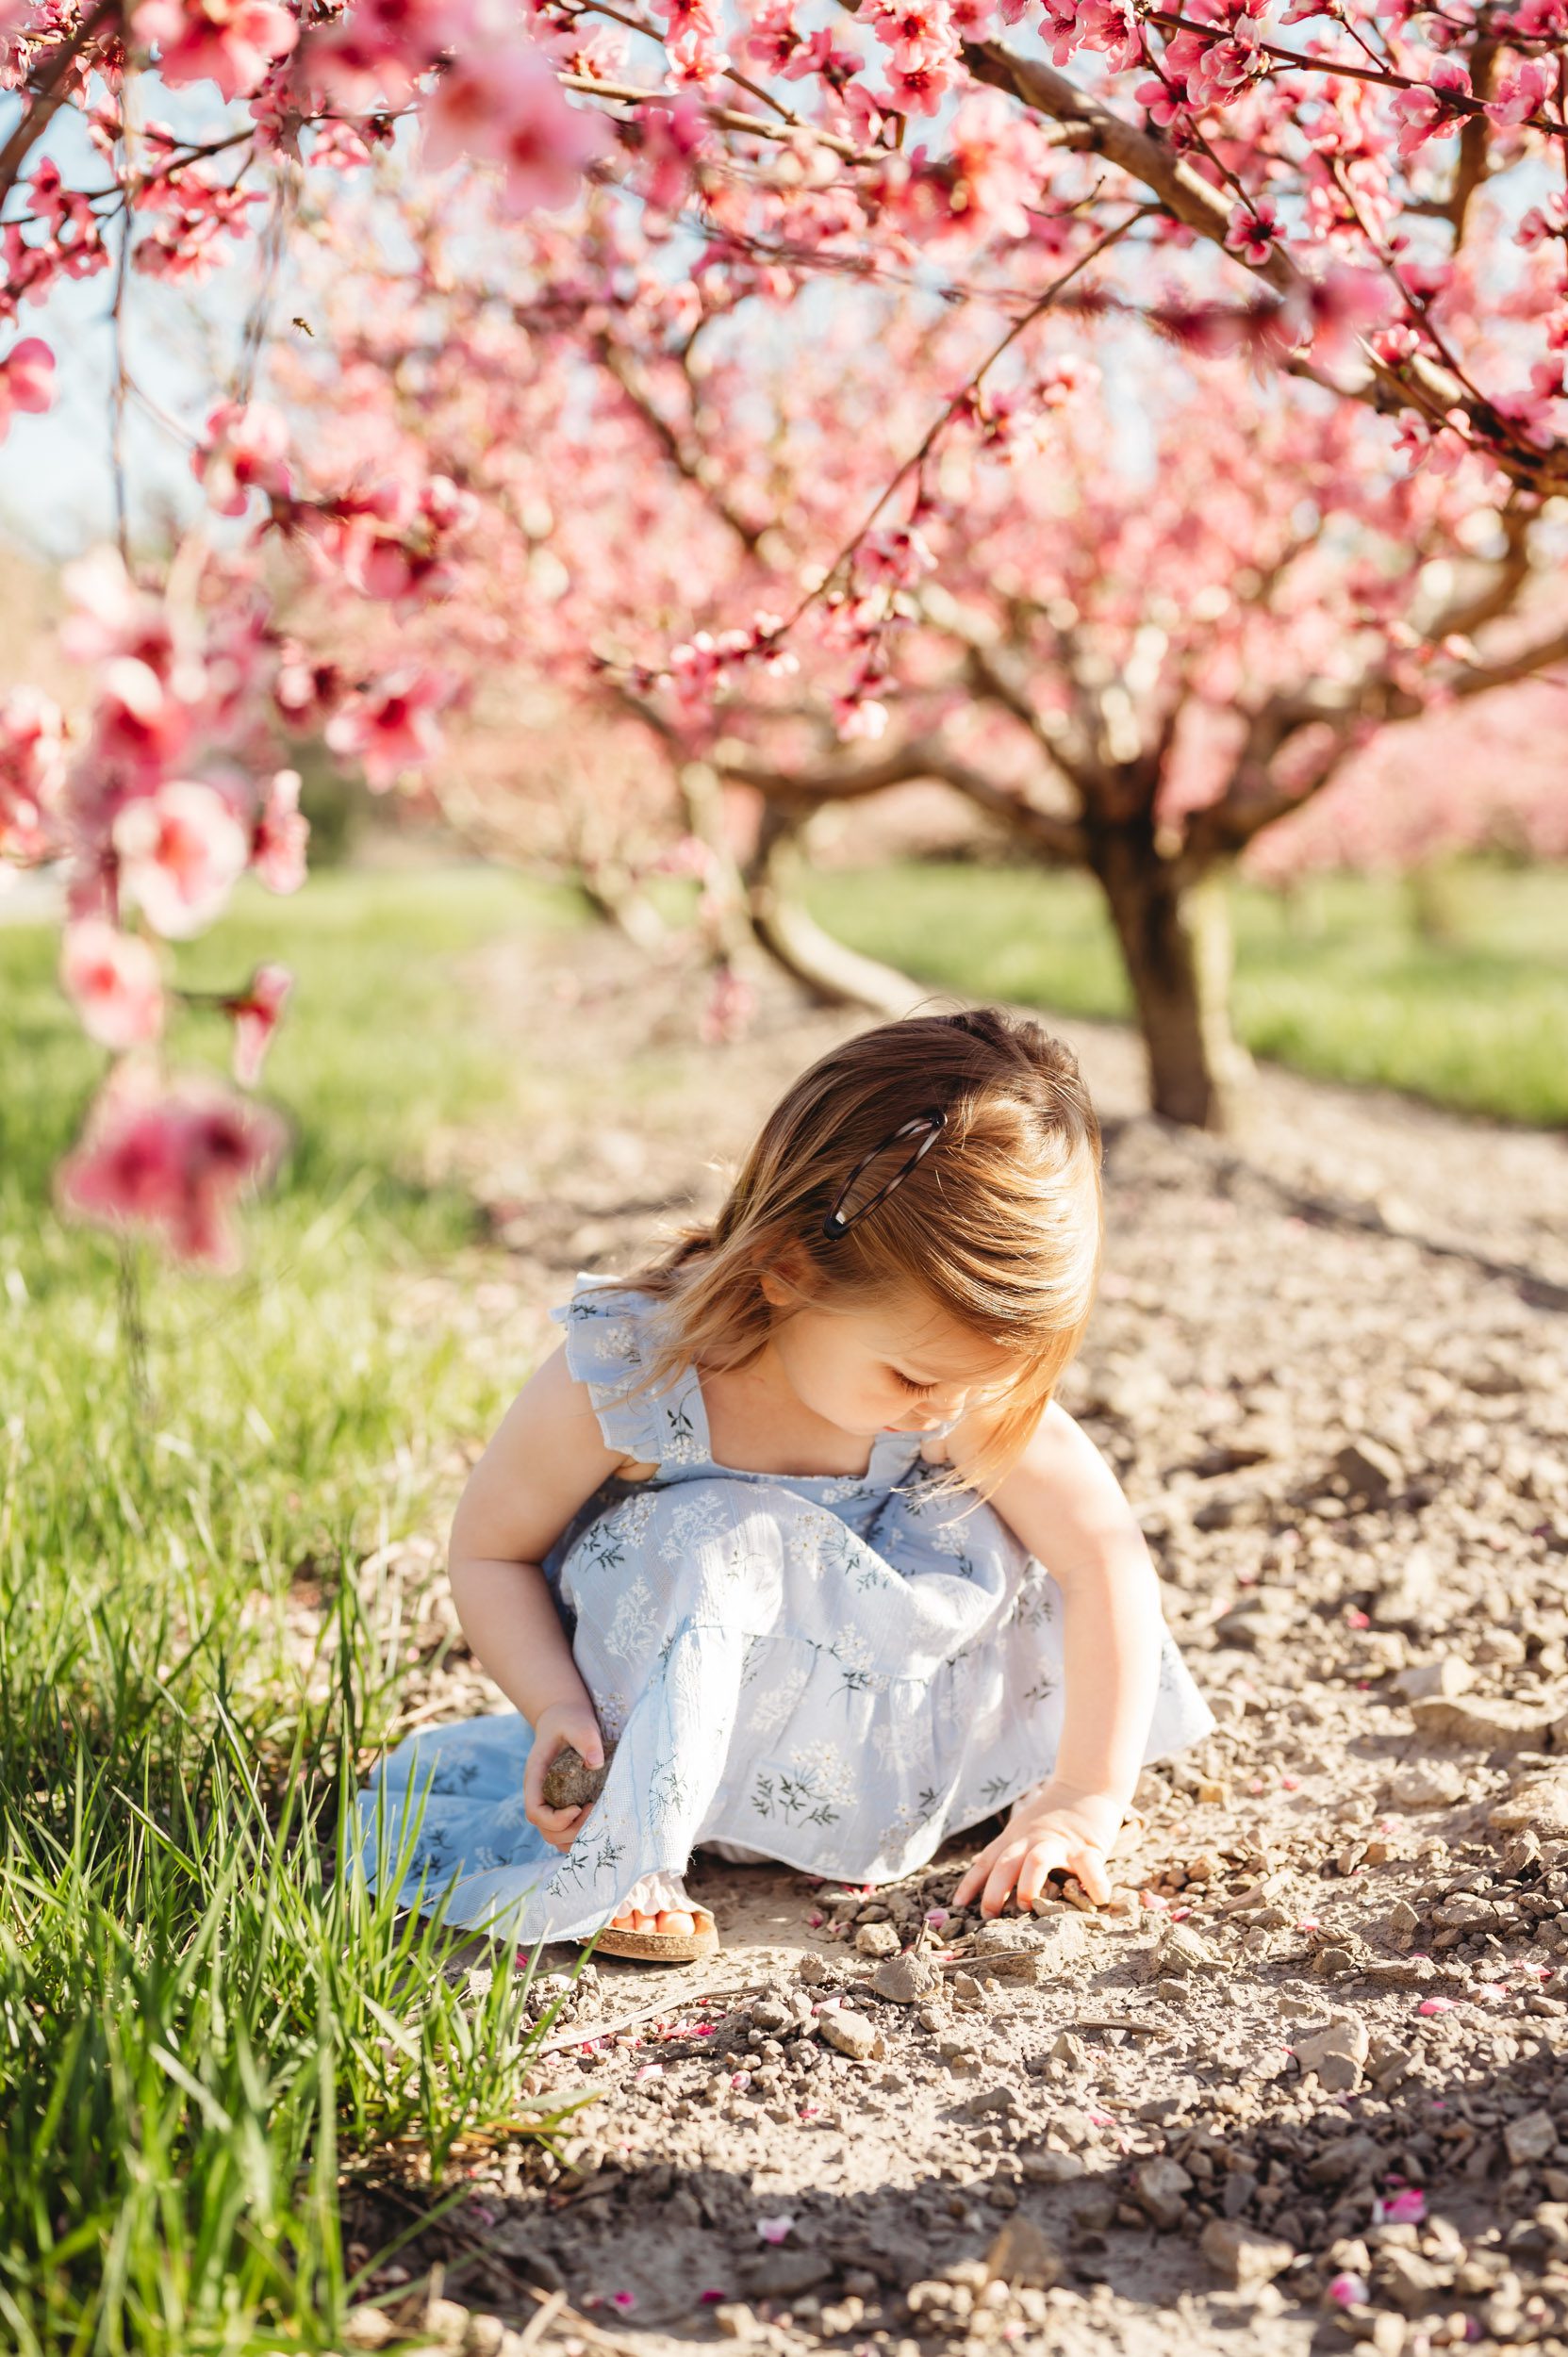 a young girl squatting down under a row of peach trees full of pink flowers in bloom during a spring mini session